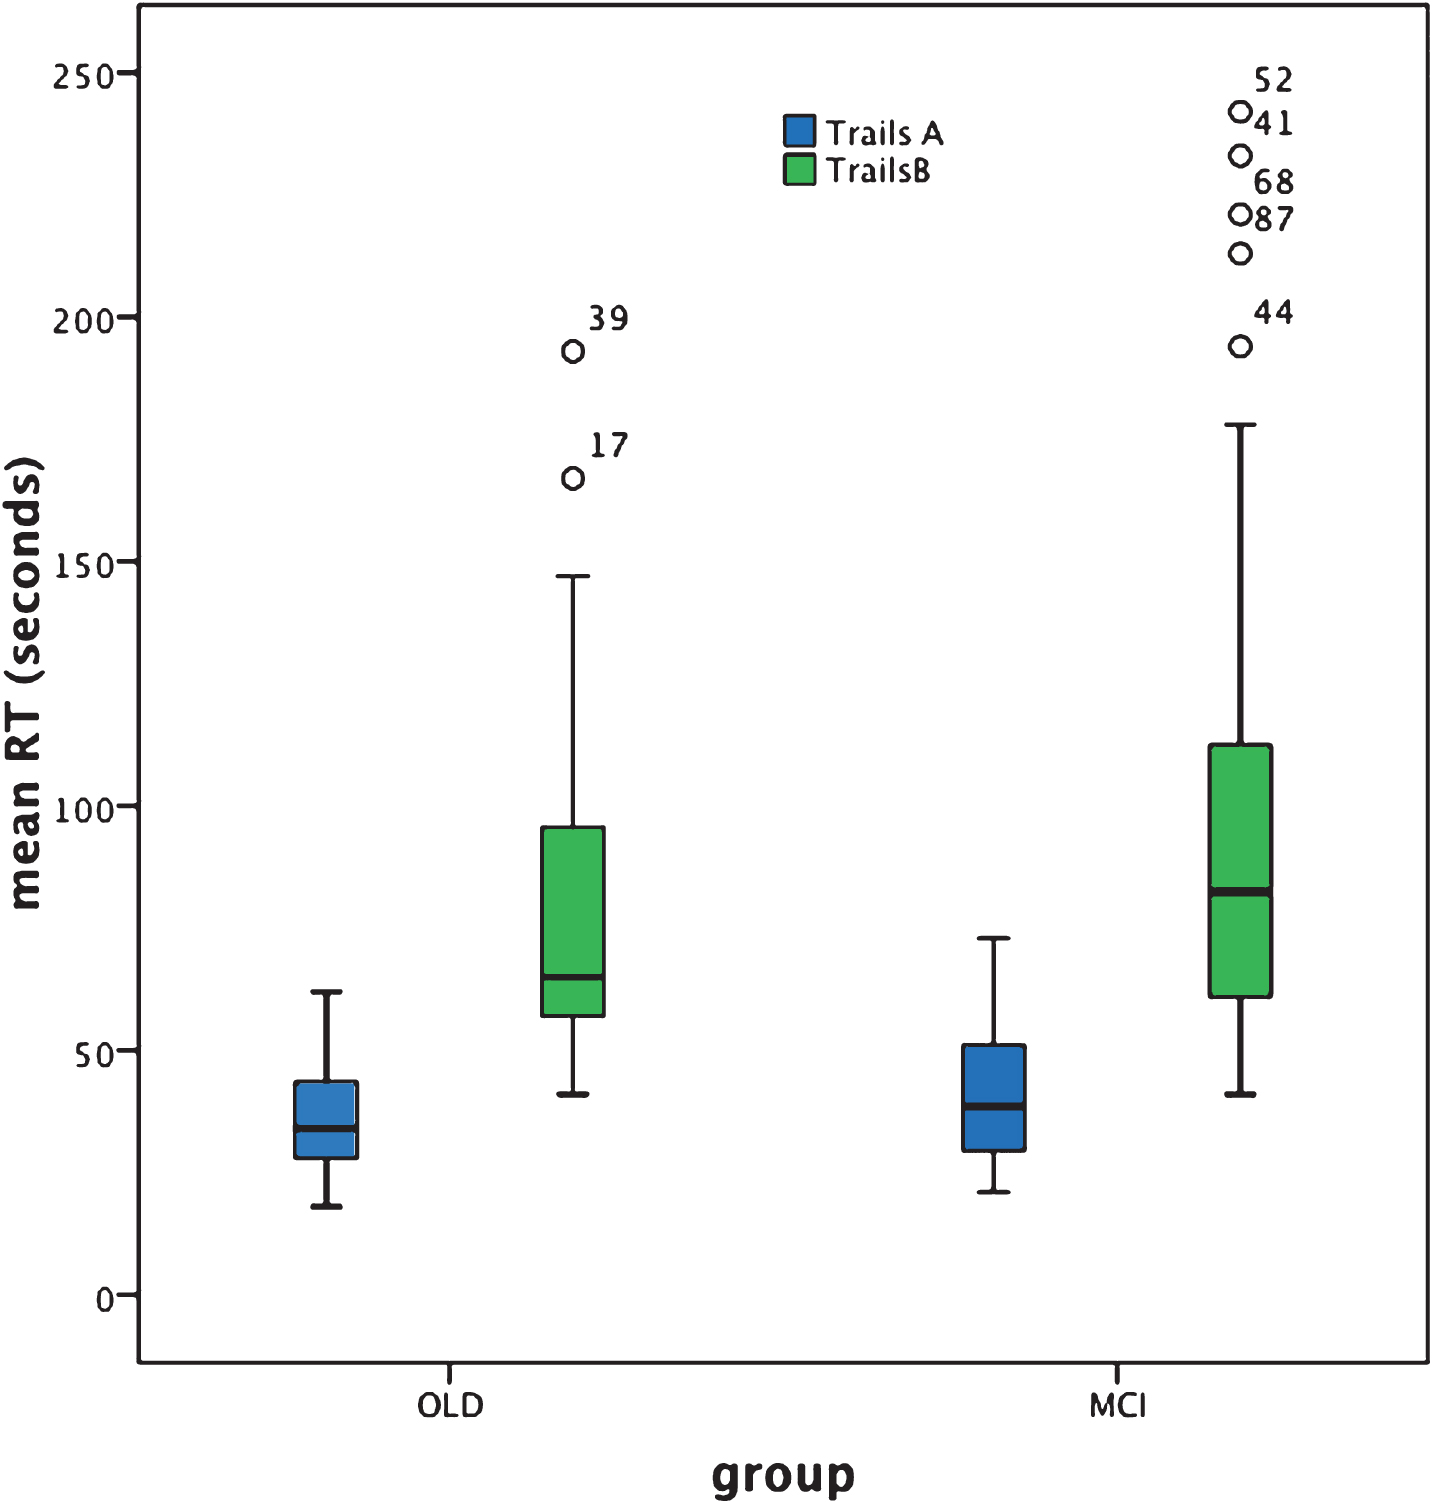 BOX plot of Trails A and B performance based on individual response speed (seconds).